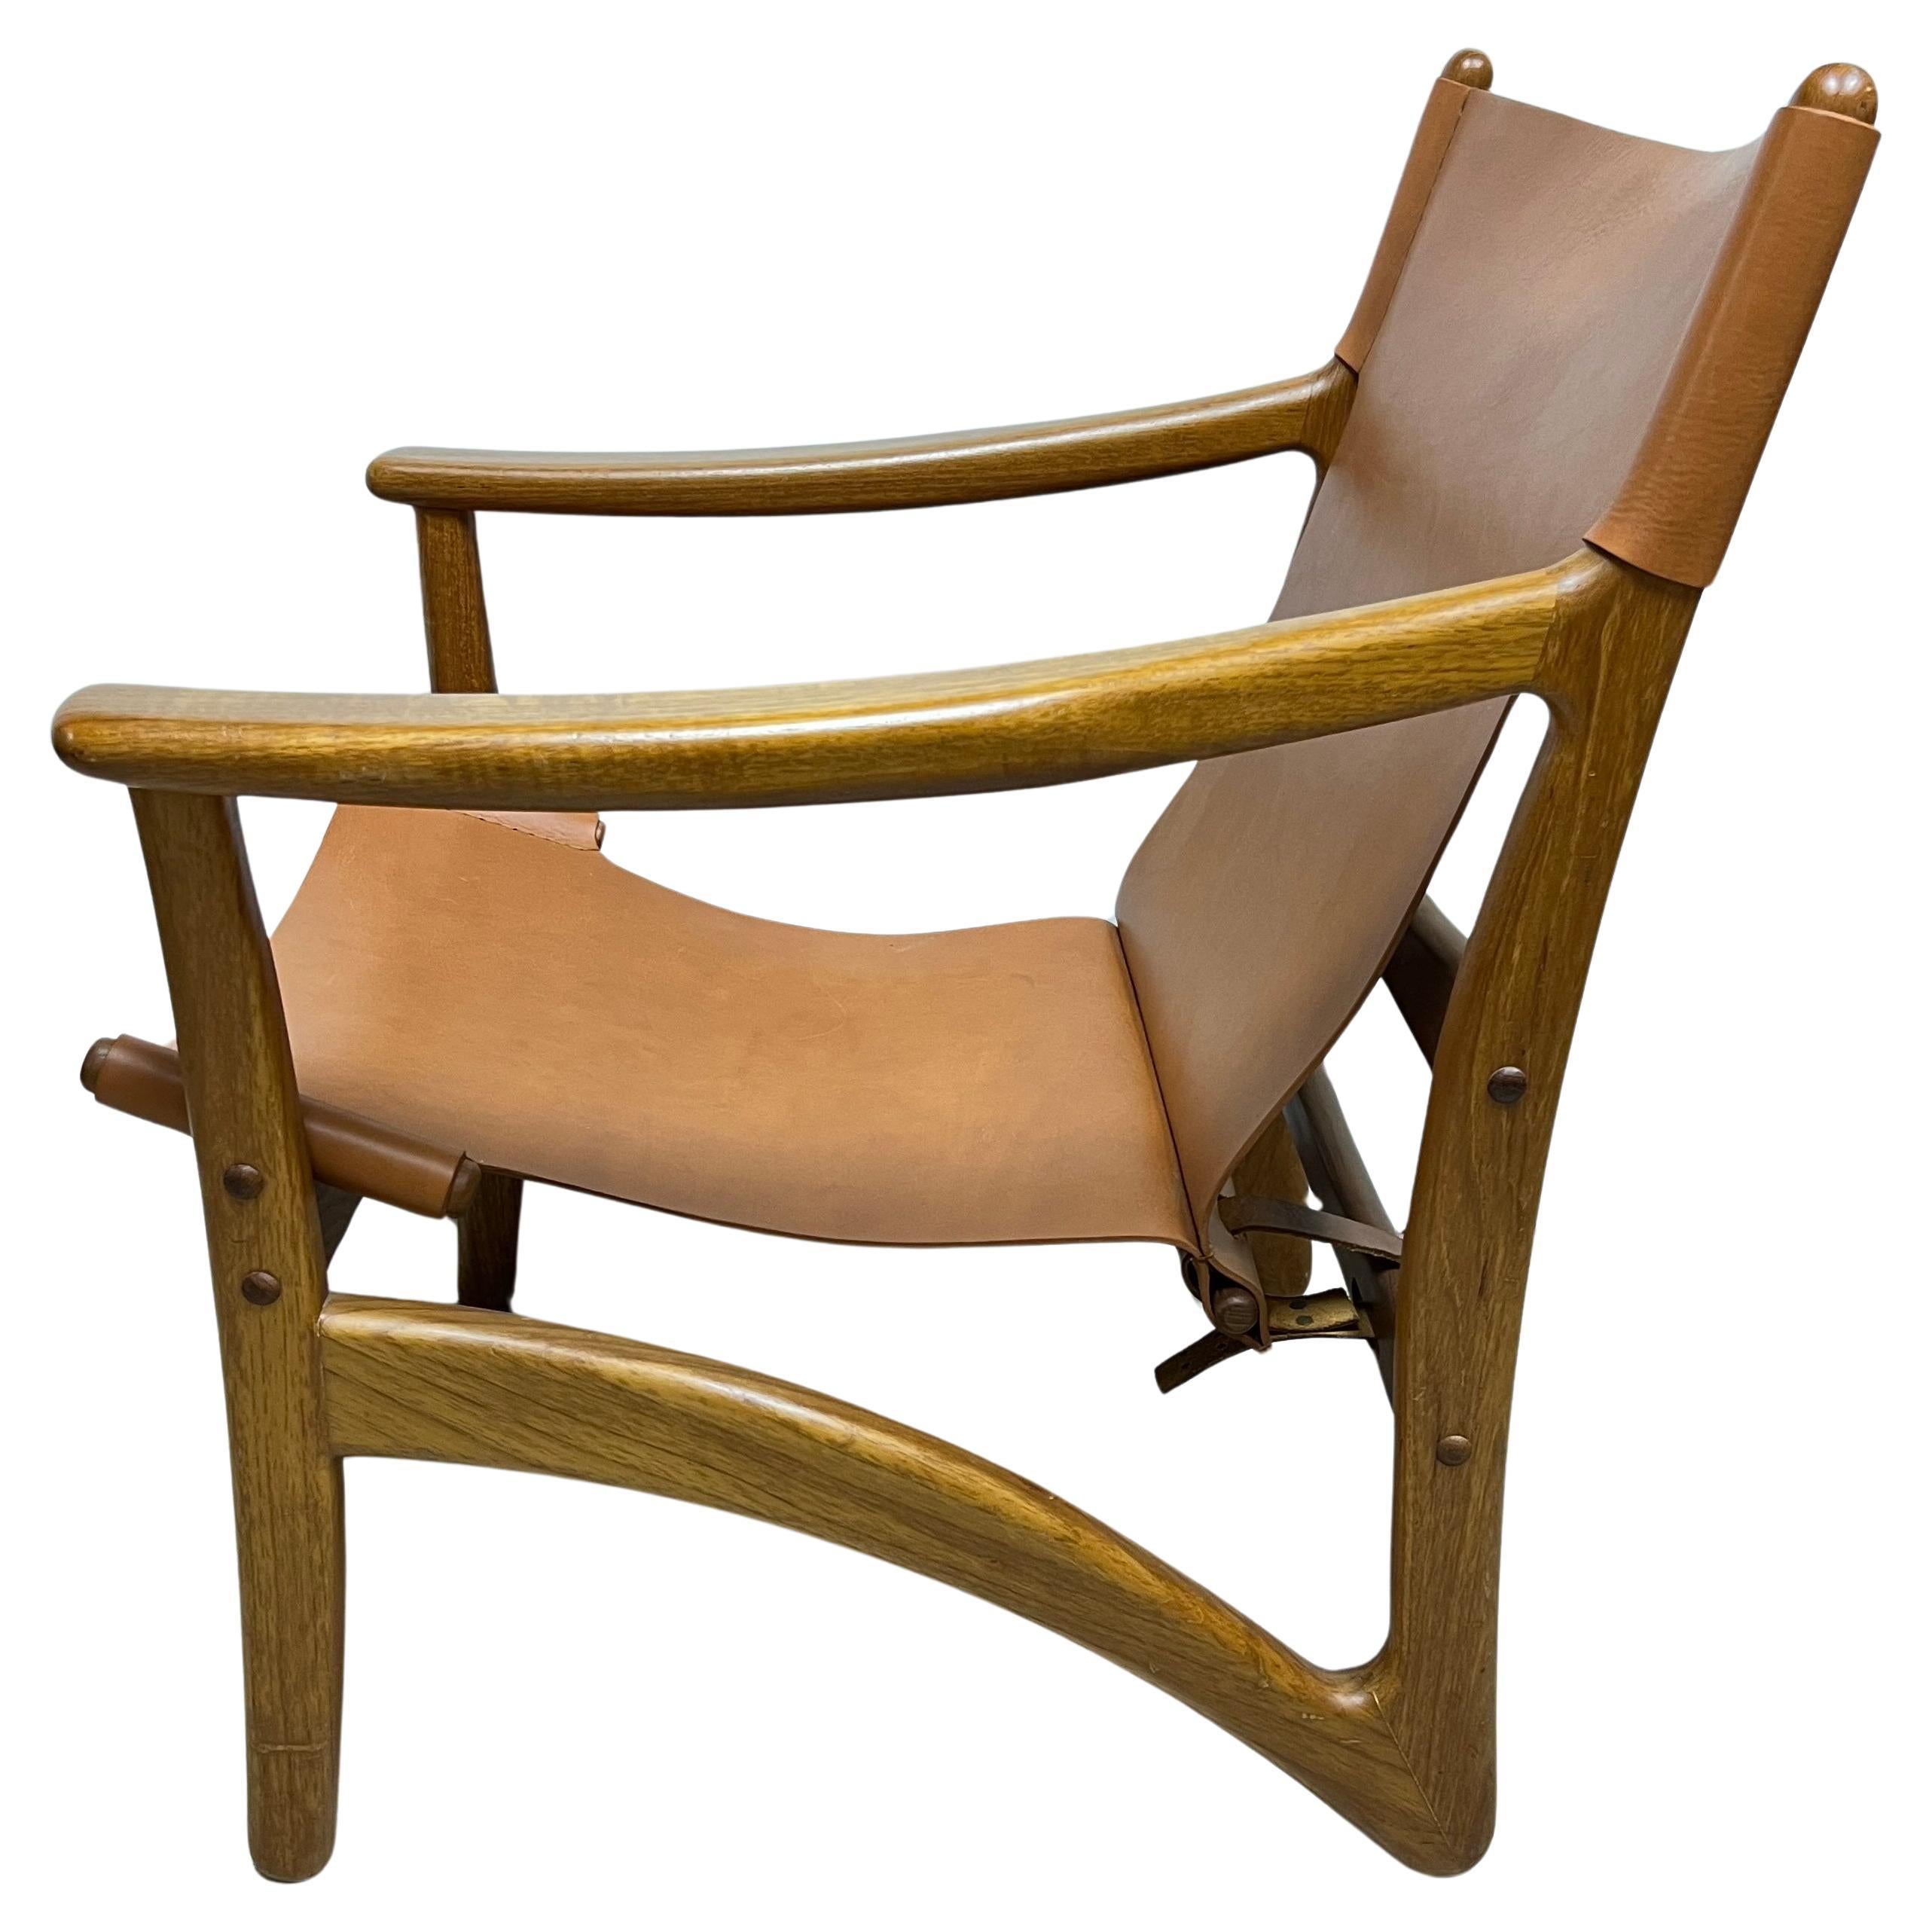 Arne Vodder for Kircodan Danish Teak and Cognac Leather Lounge Chair 1950s In Good Condition For Sale In San Angelo, TX